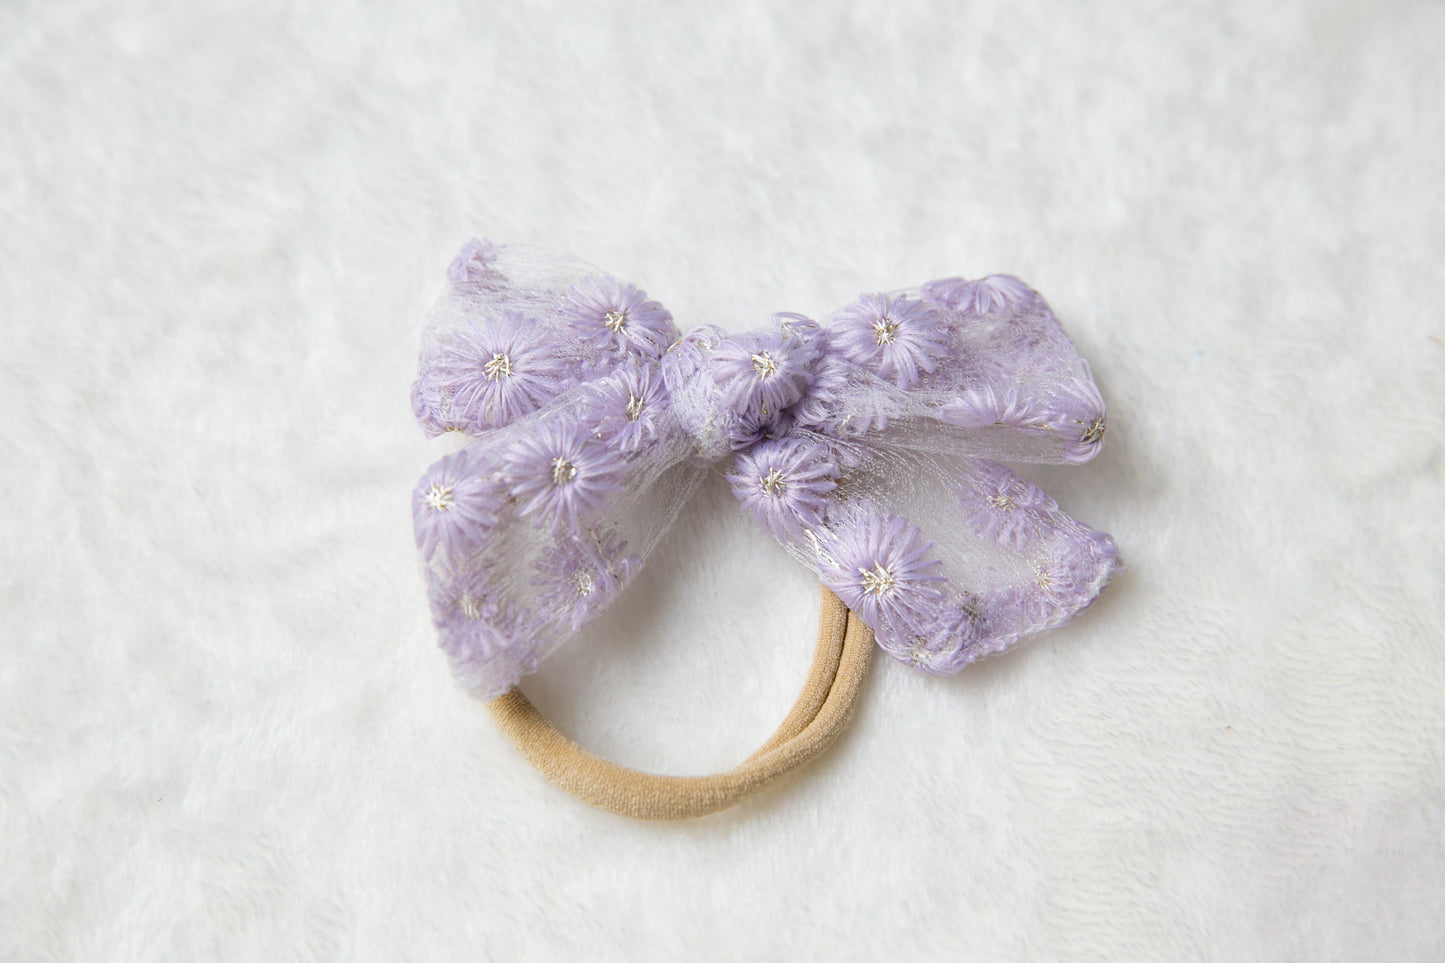 Embroidery floral headband